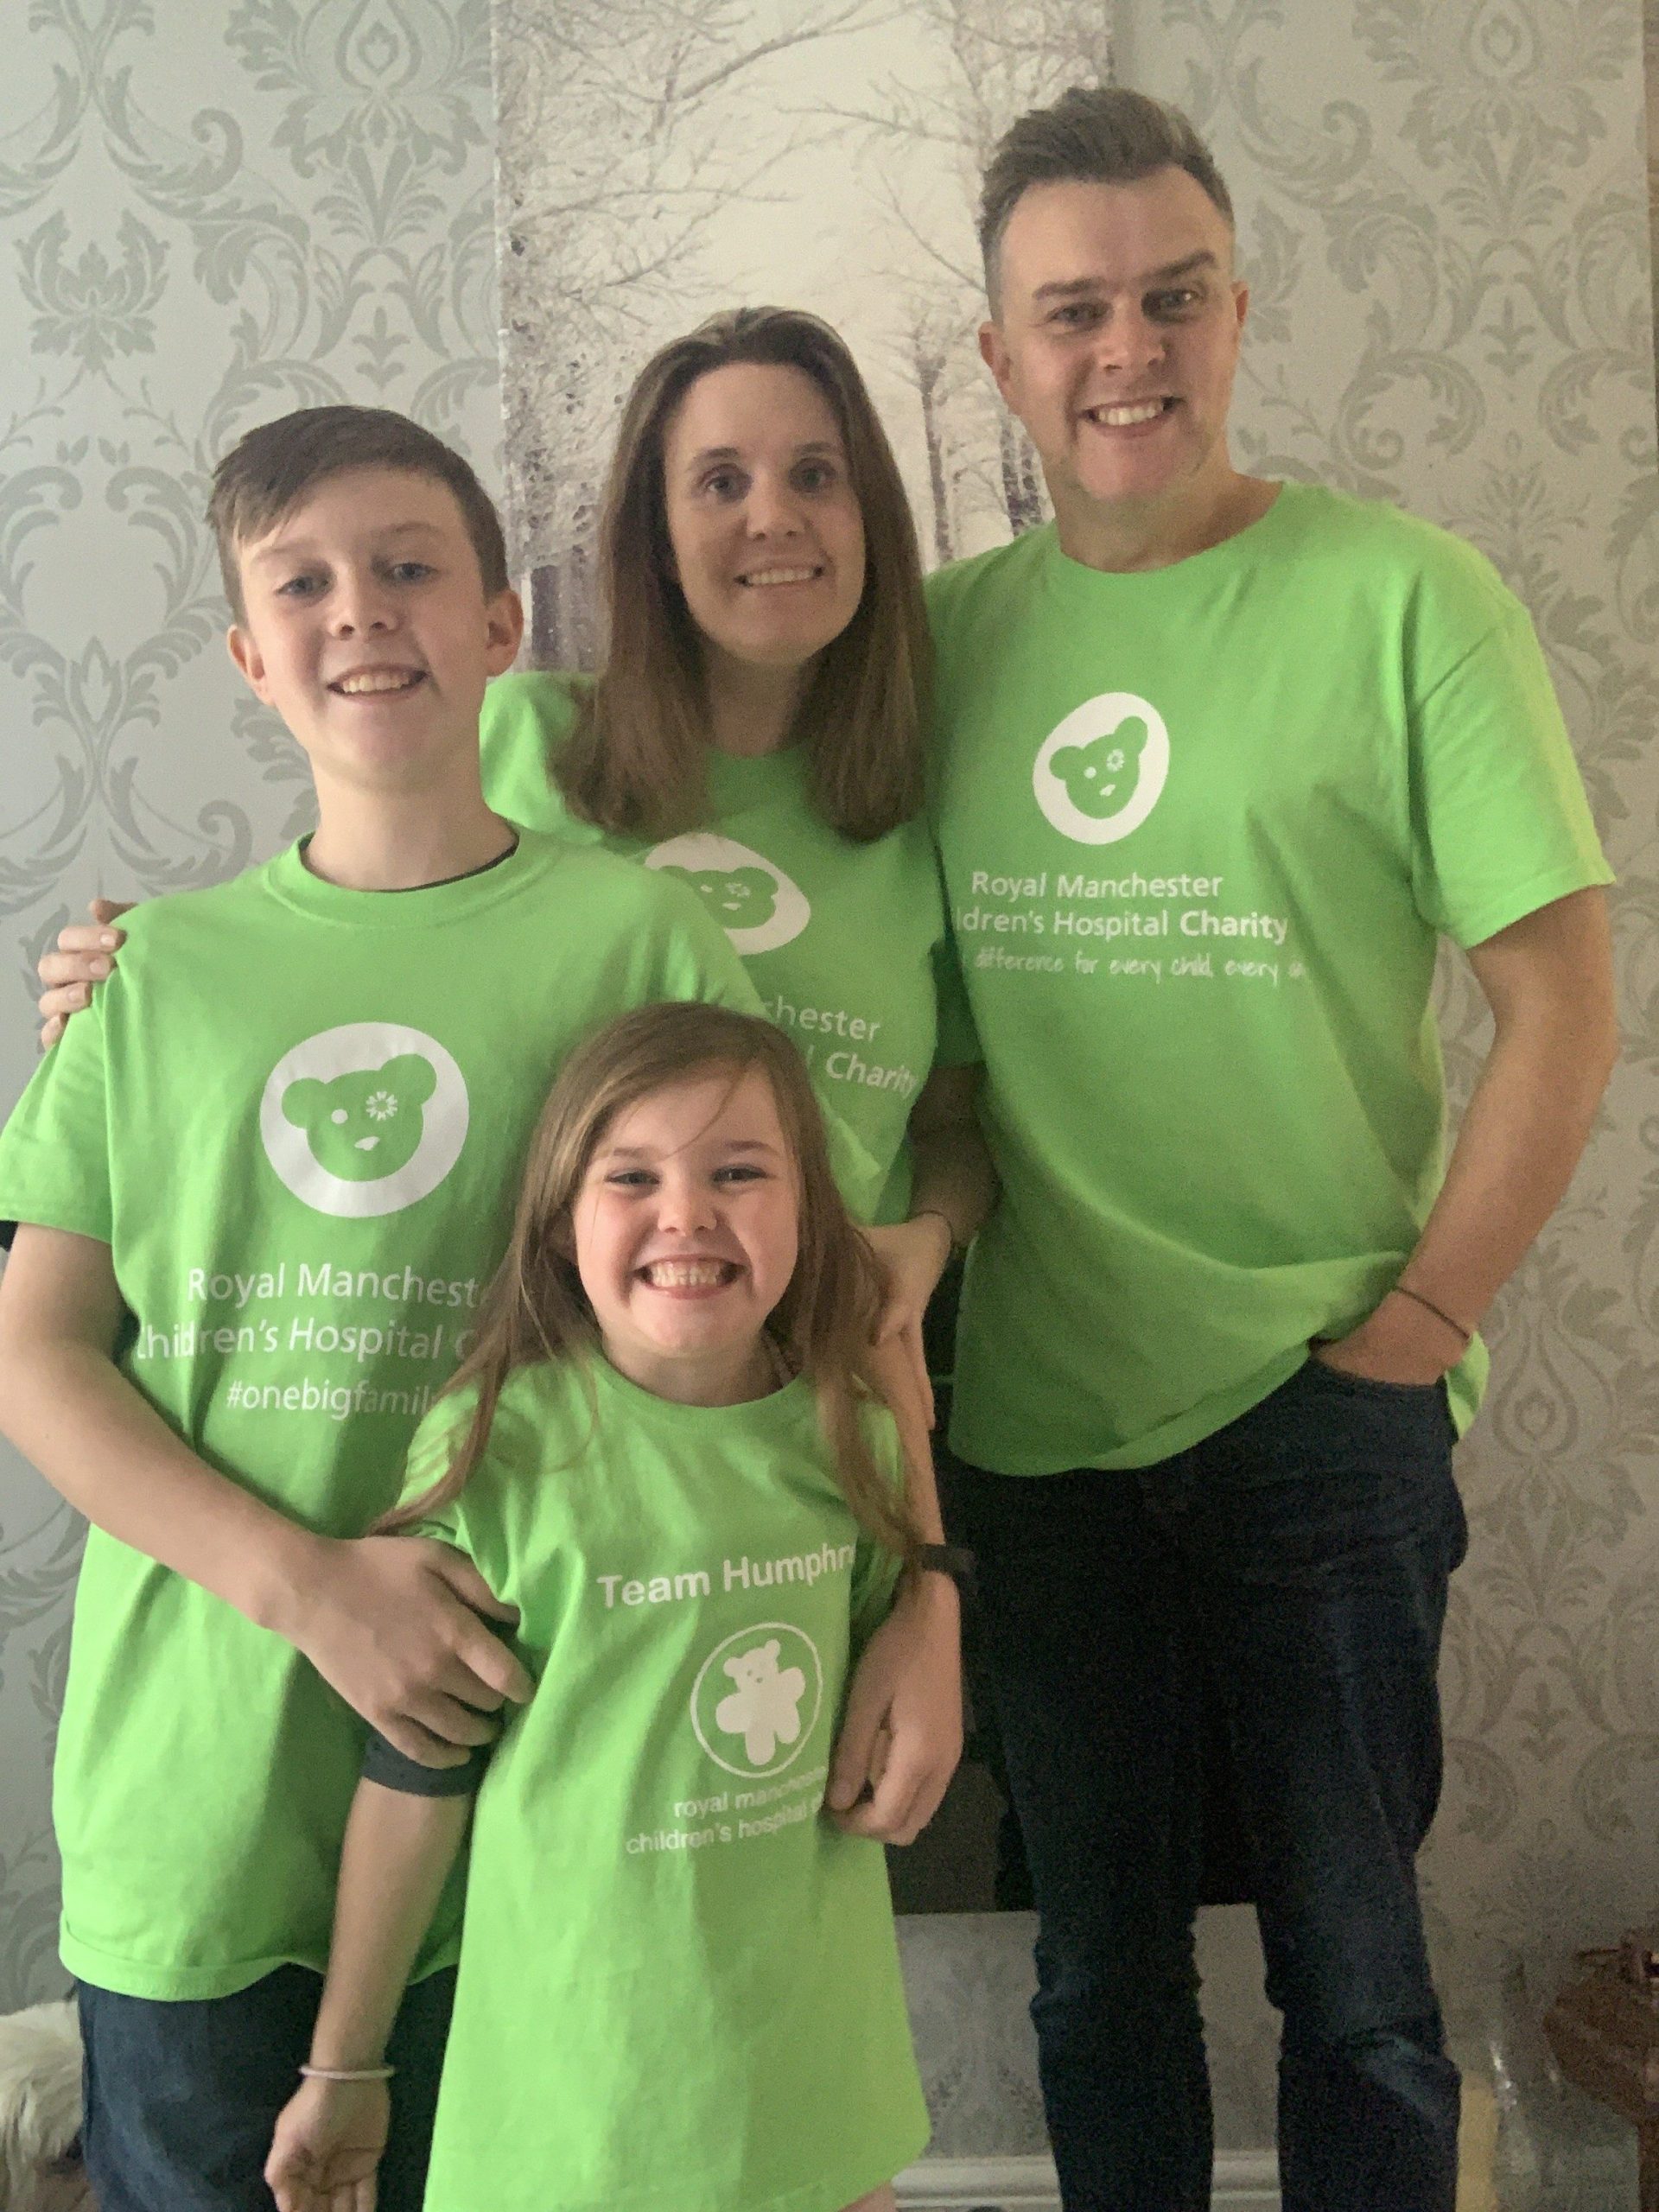 A. Tom, Gemma, Charlie and Sofia wearing Royal Manchester Childrens Hospital Charity Tshirts